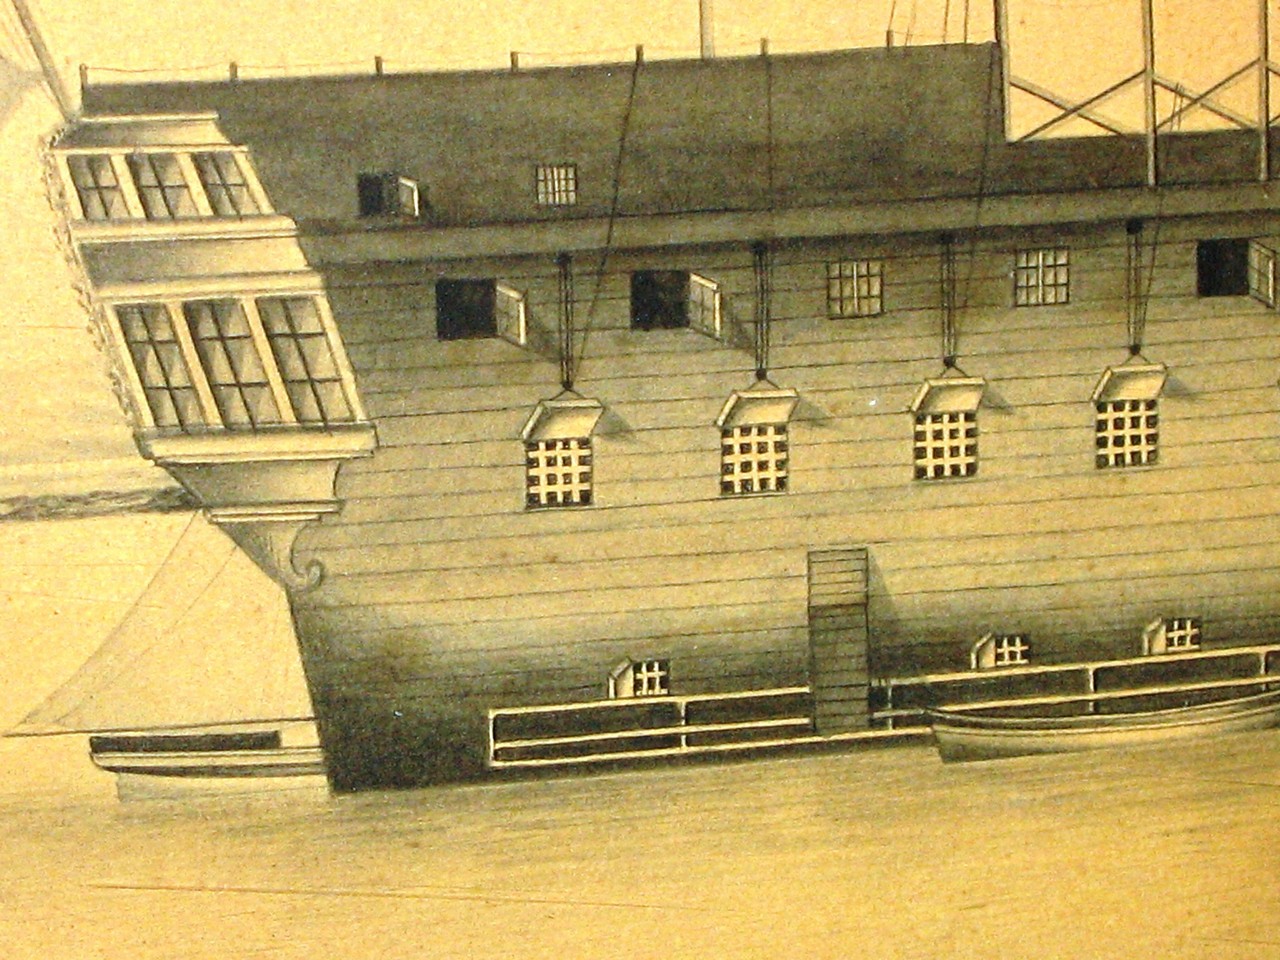 FRENCH PRISONER SCHOOL, CIRCA 1812, A Prison Hulk anchored in the Medway with a Man of War beyond, - Image 5 of 6